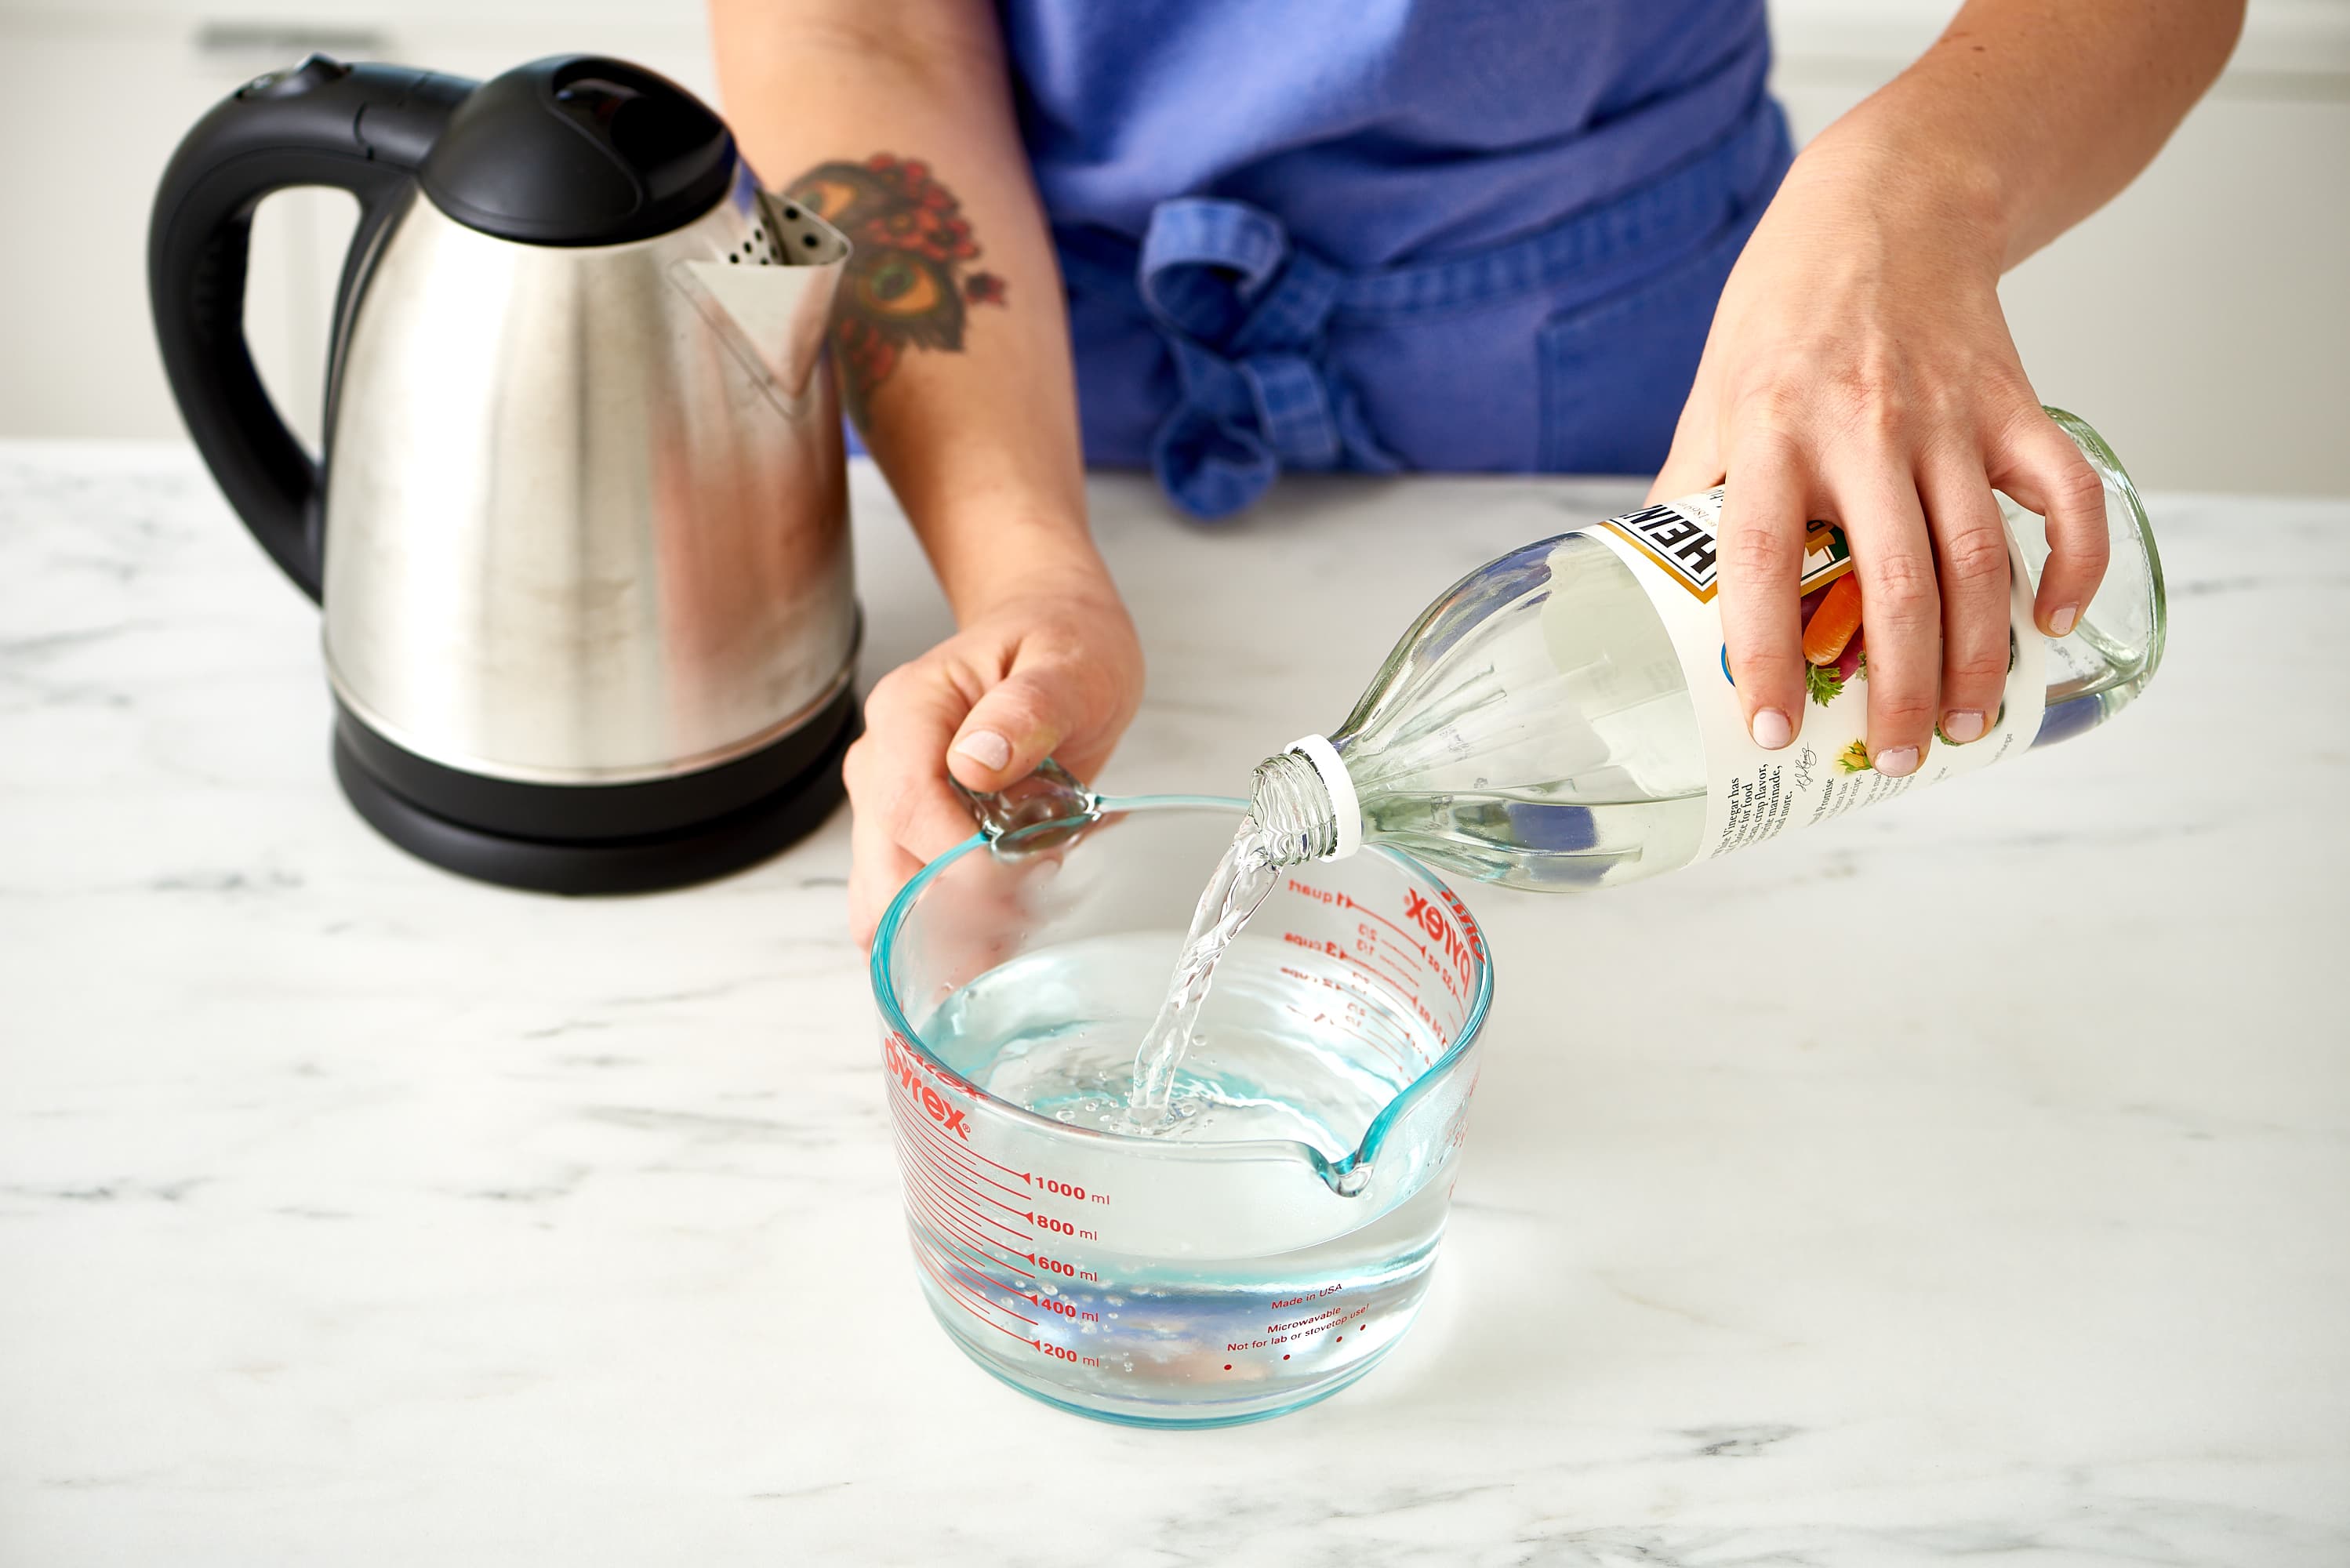 cleaning water kettle with vinegar